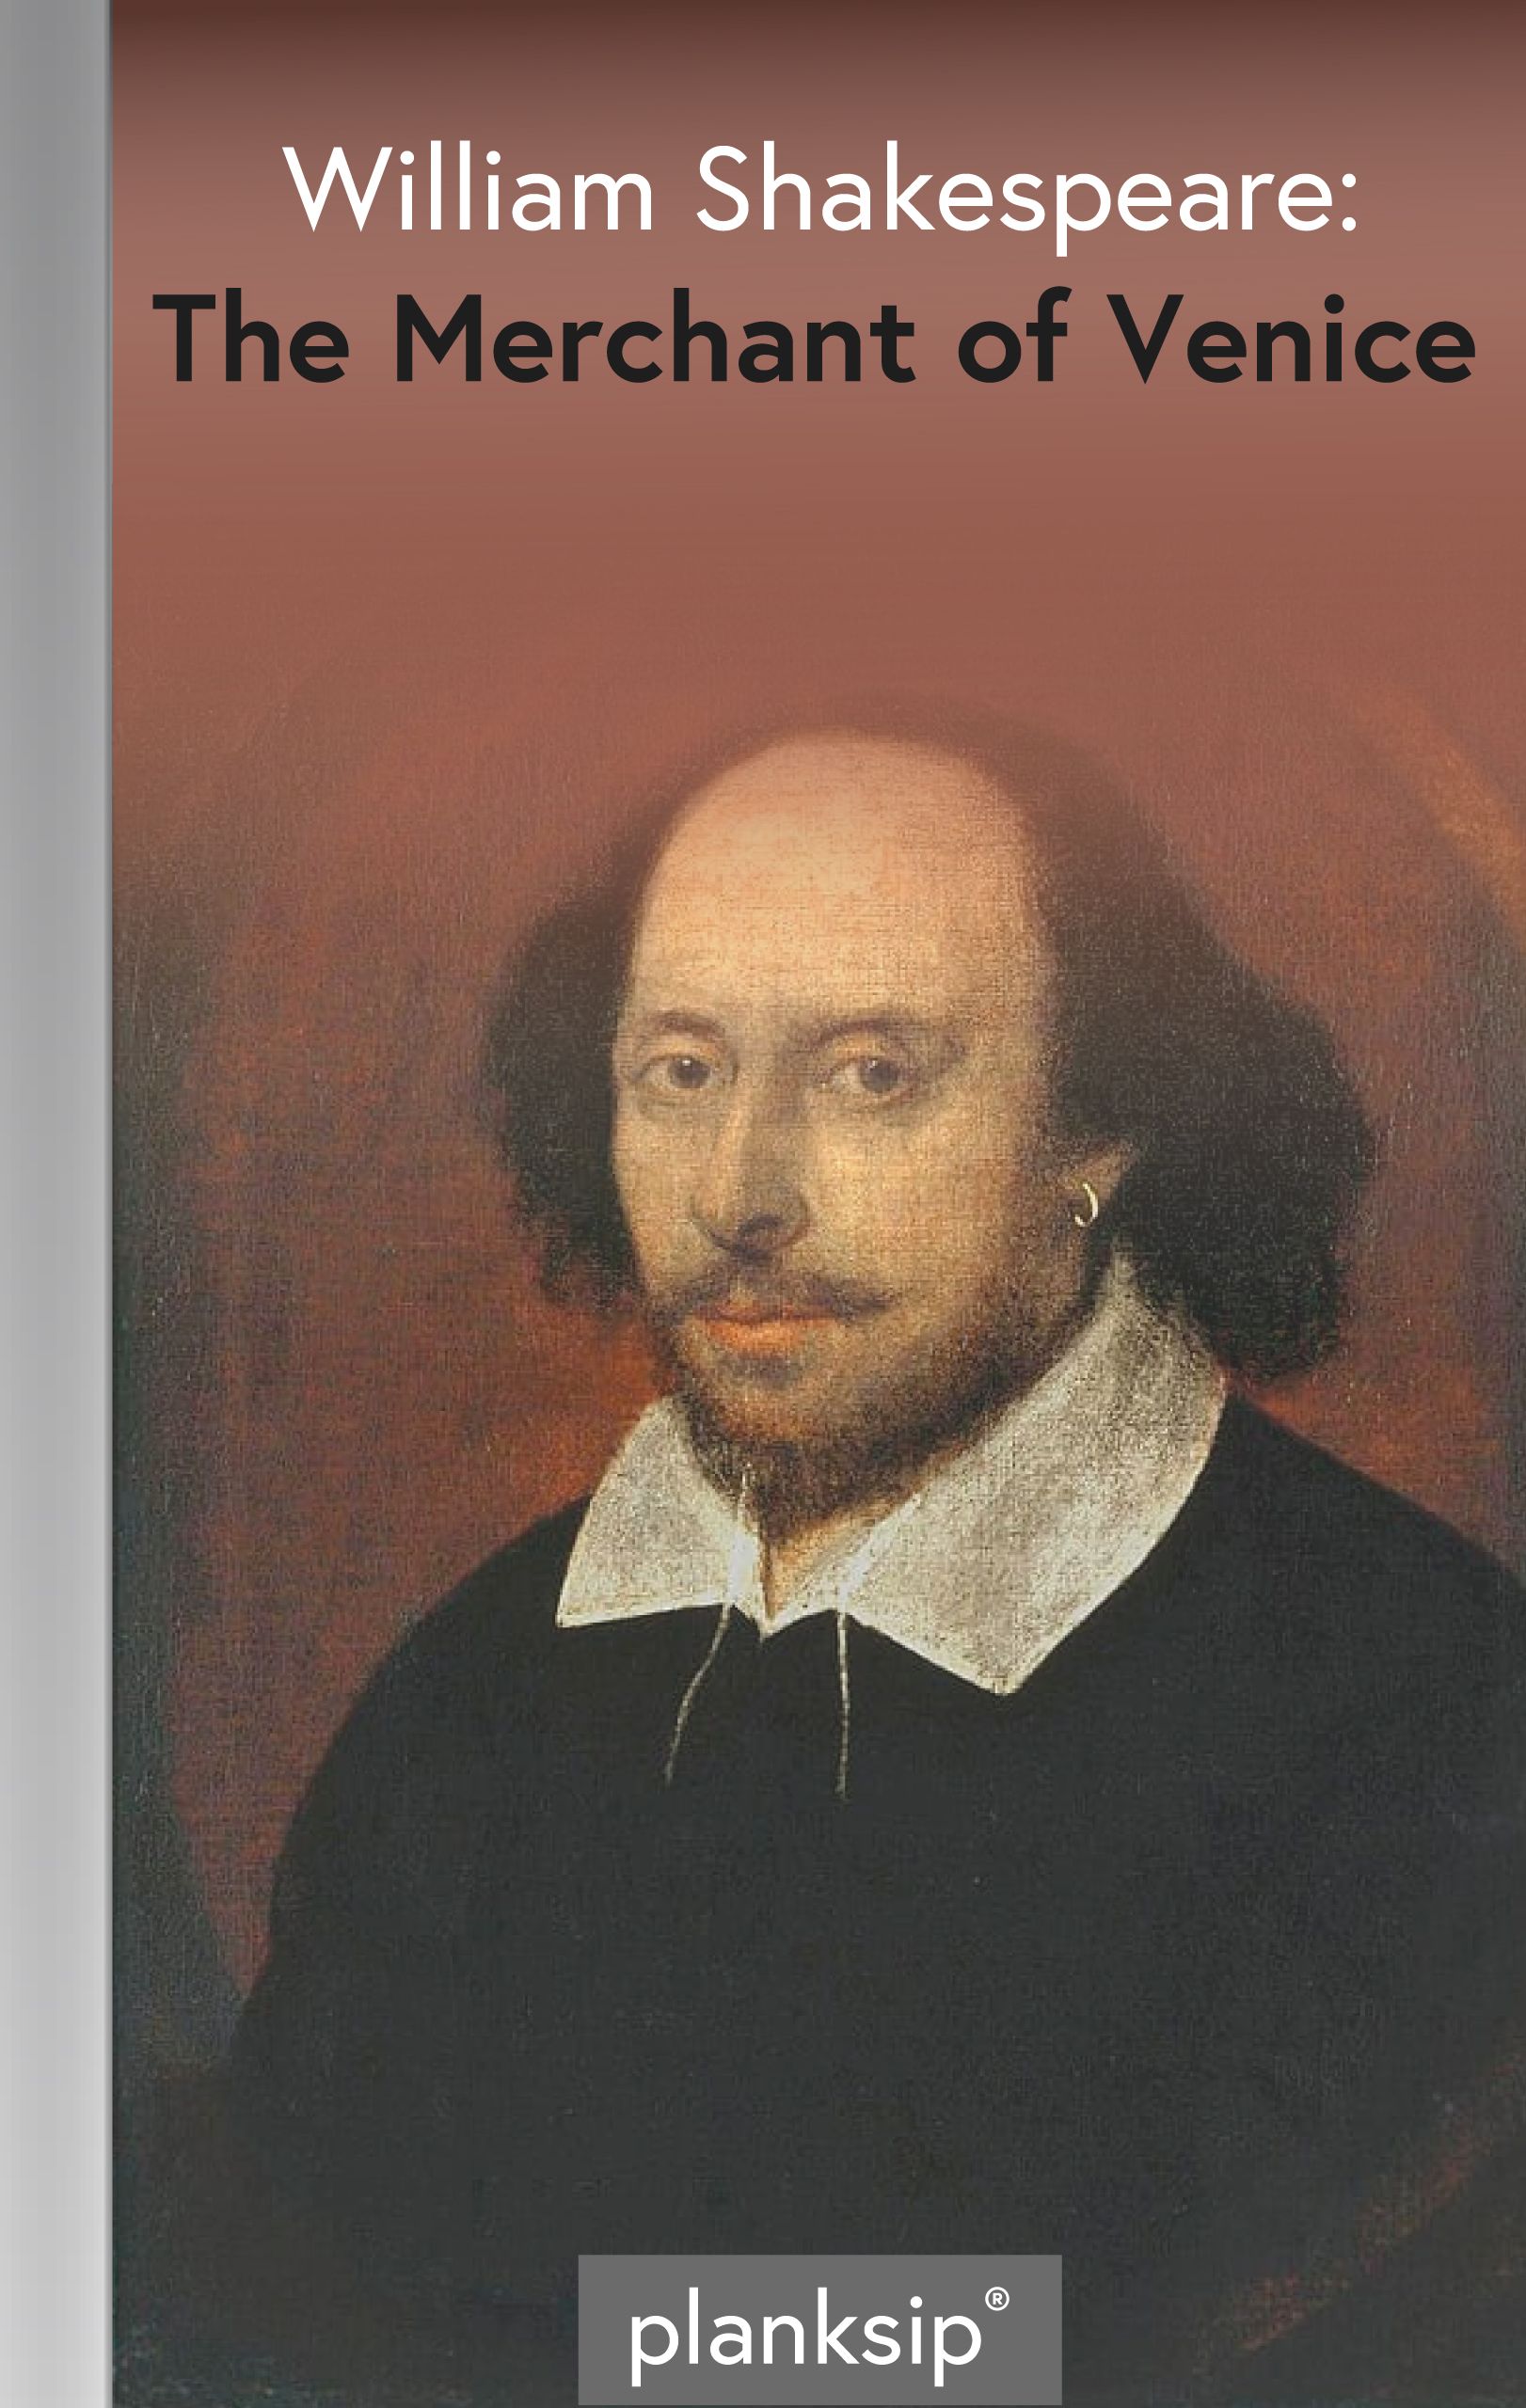 book review of any book by william shakespeare